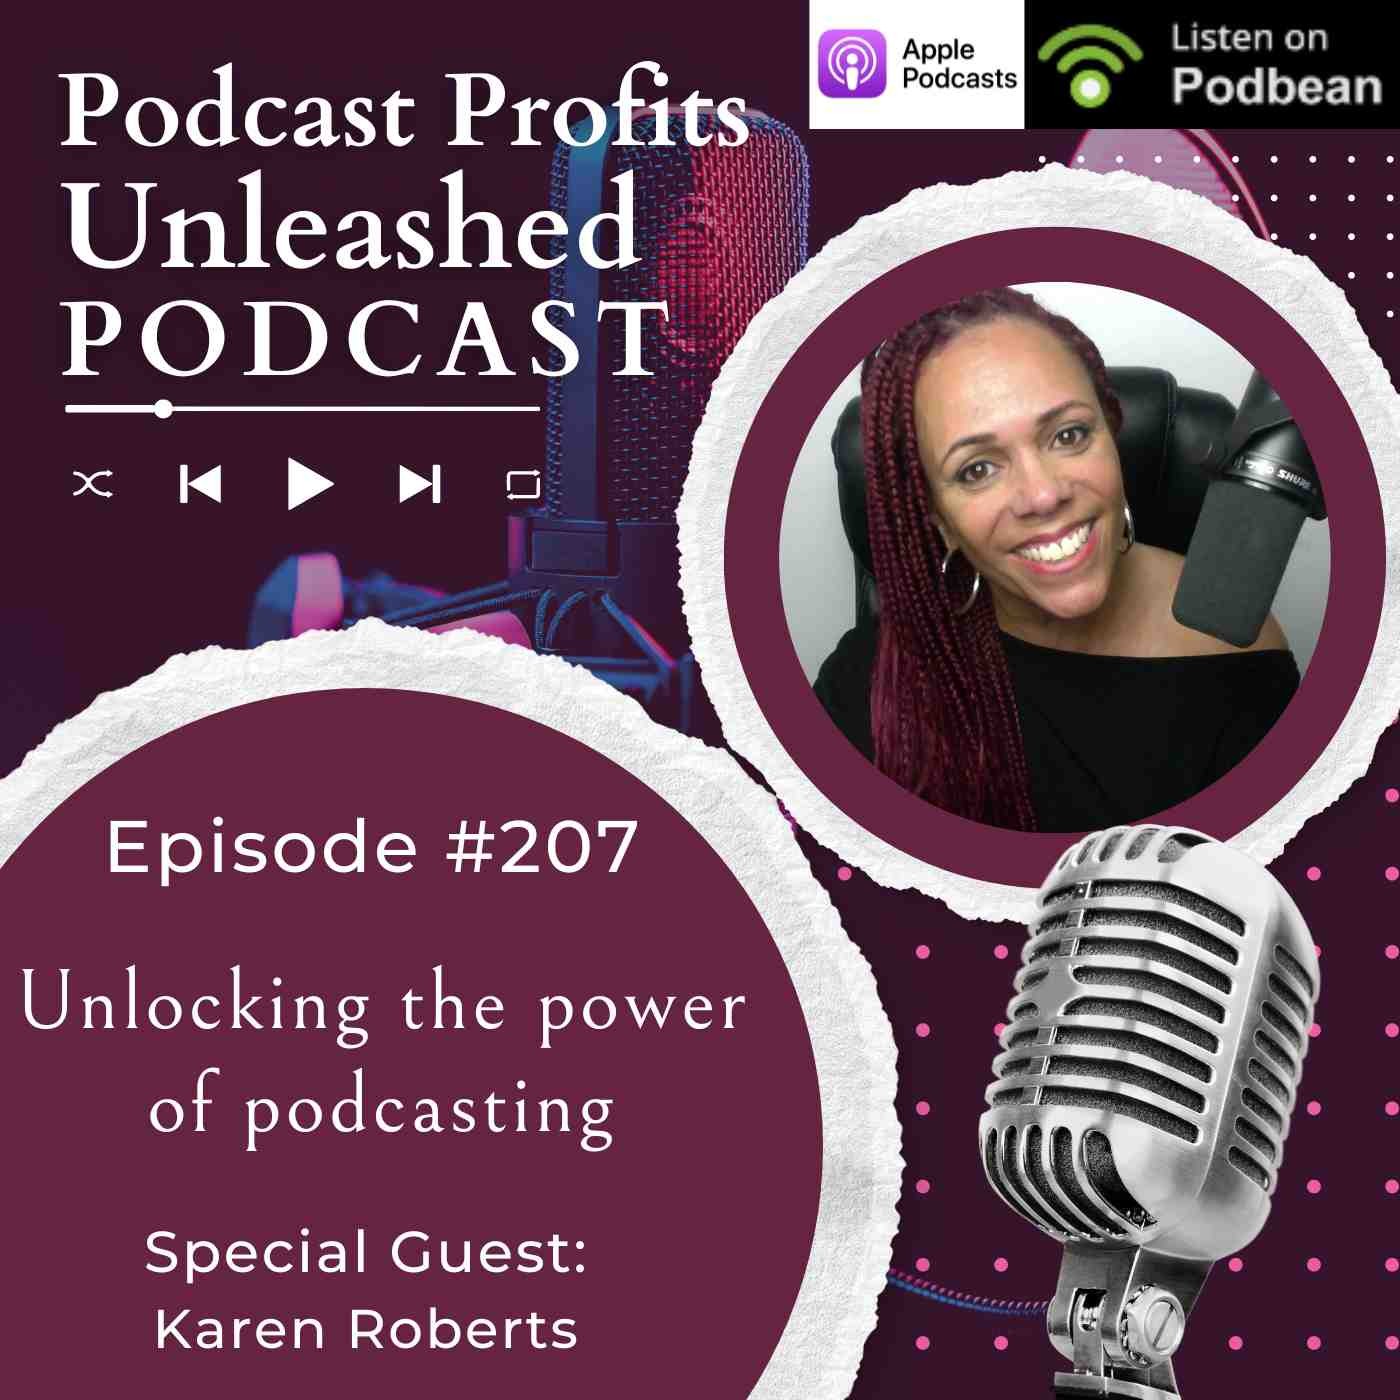 Unlocking the power of podcasting